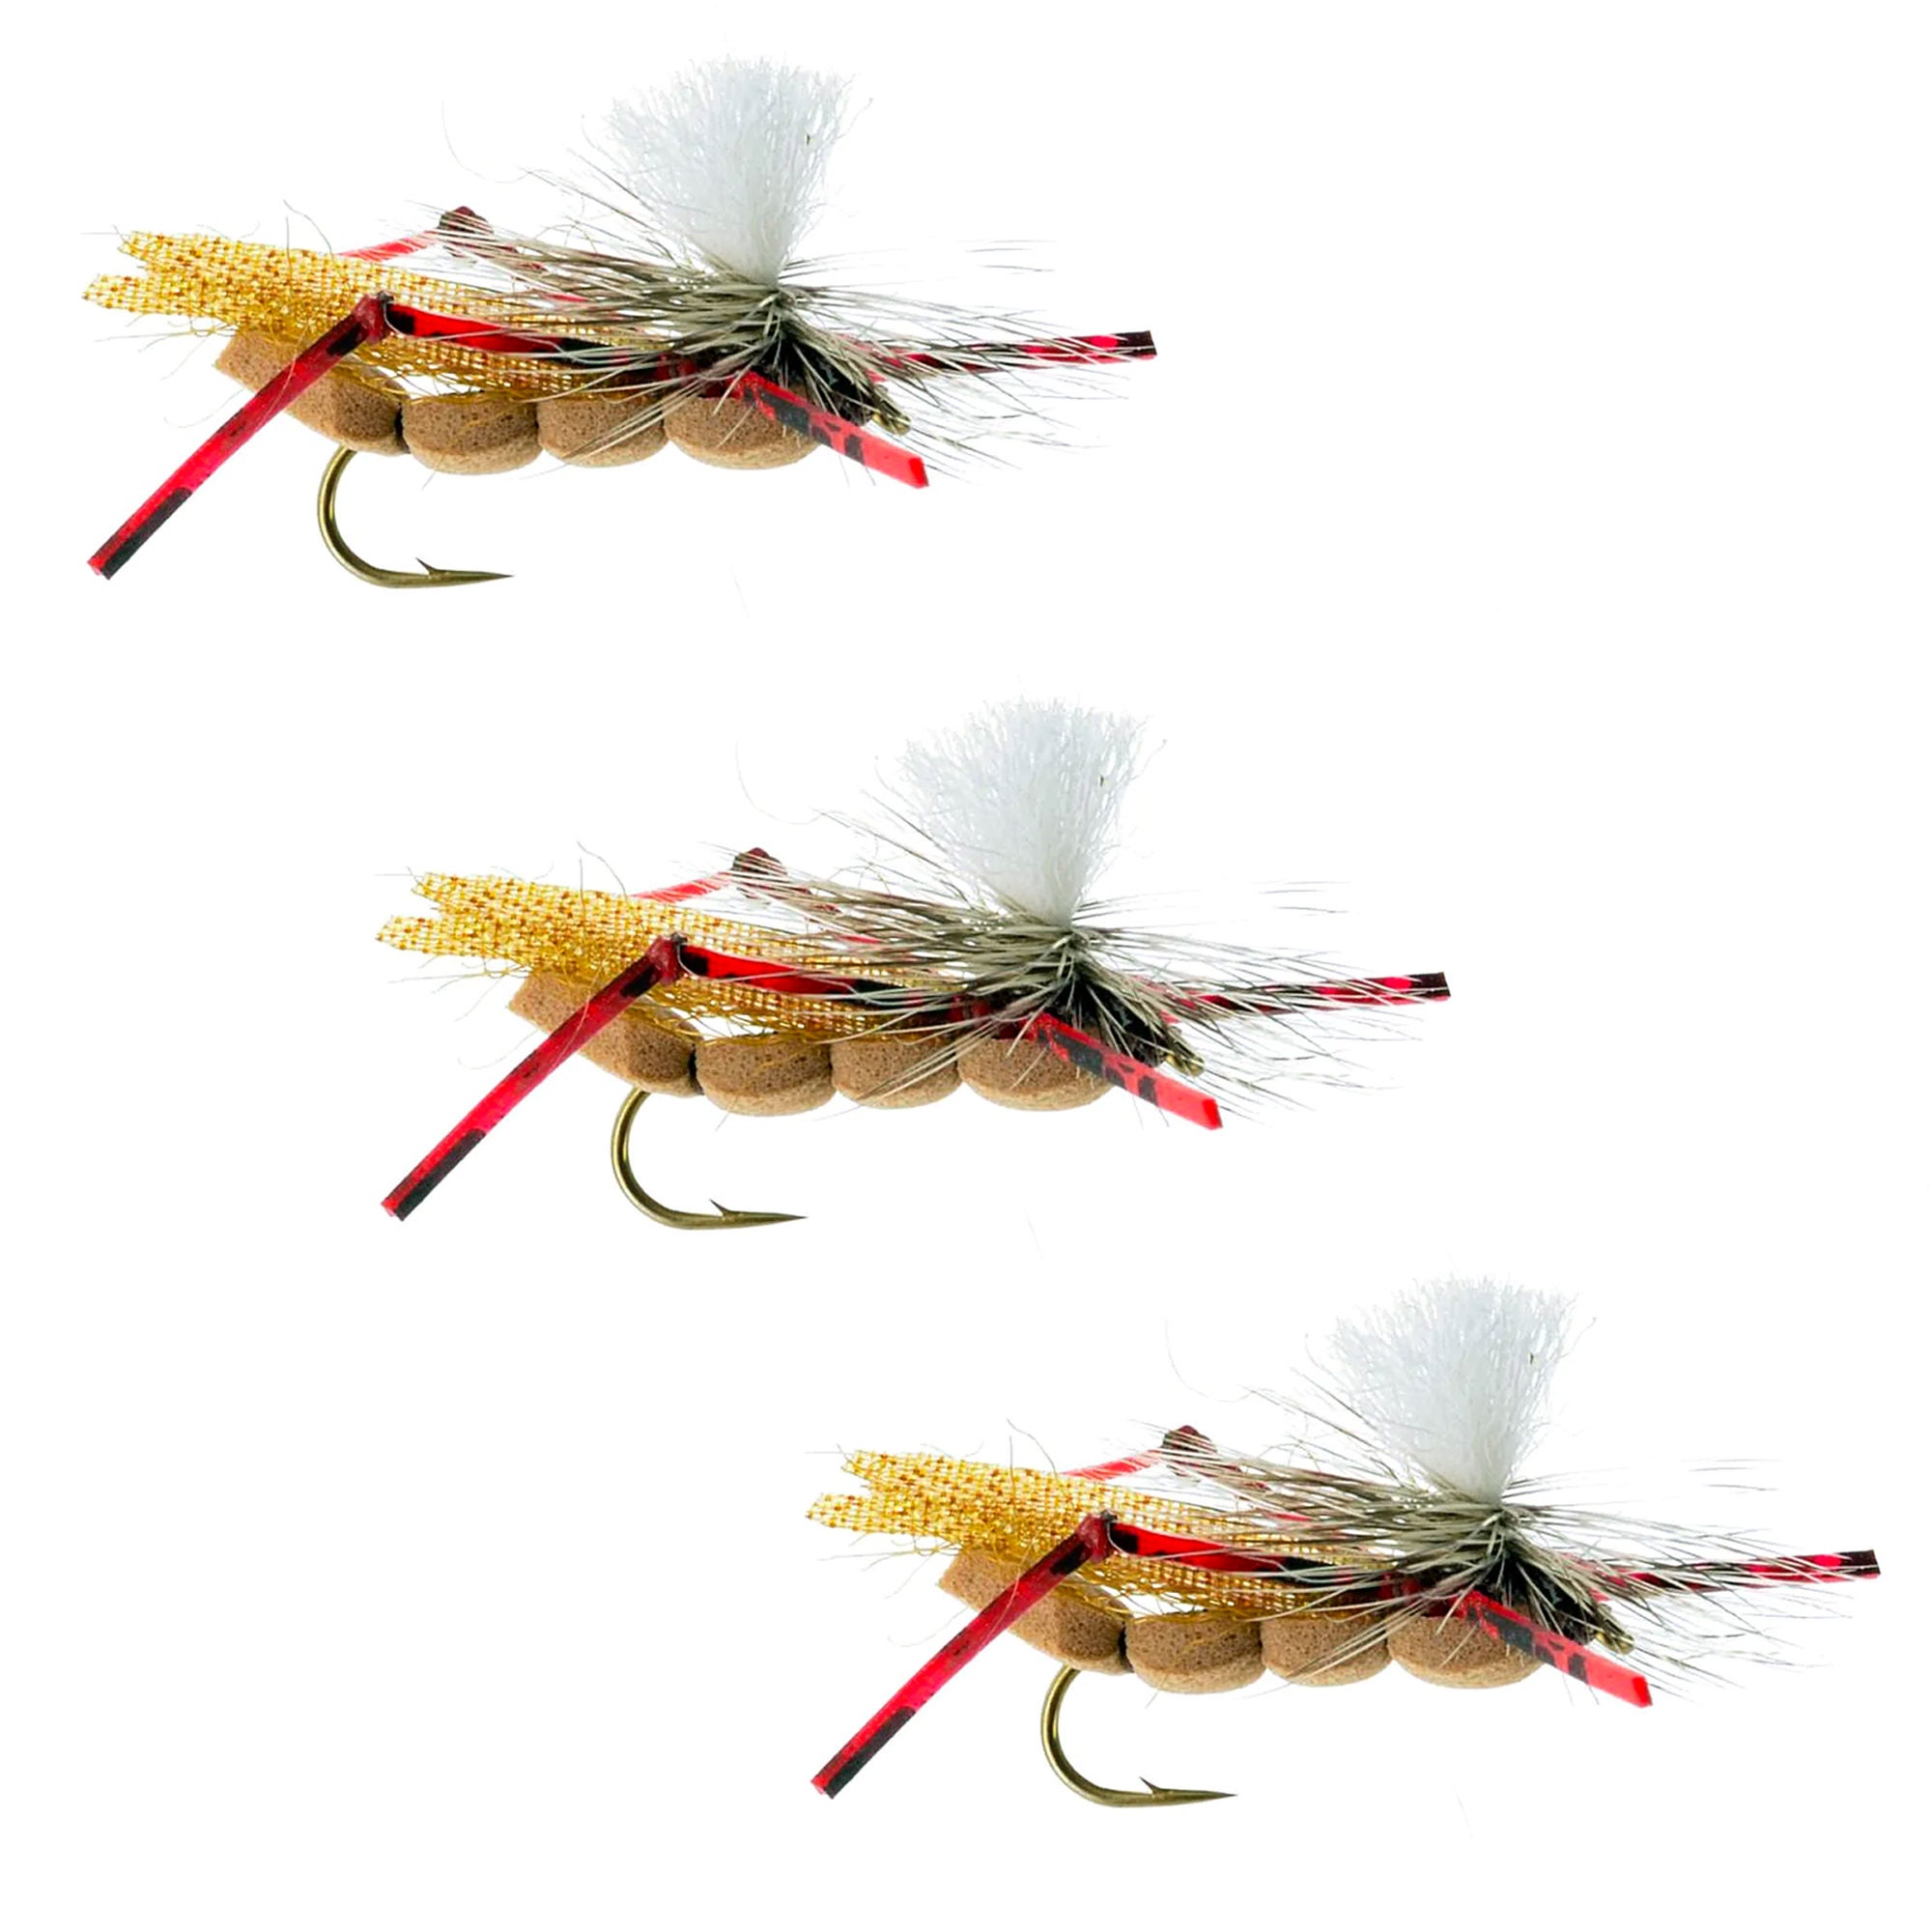 Red Legs Hopper Fly Grasshopper Flies Terrestrial Flies for Fly Fishing  Handmade Flies for Your Fly Box 3 Pack -  Canada